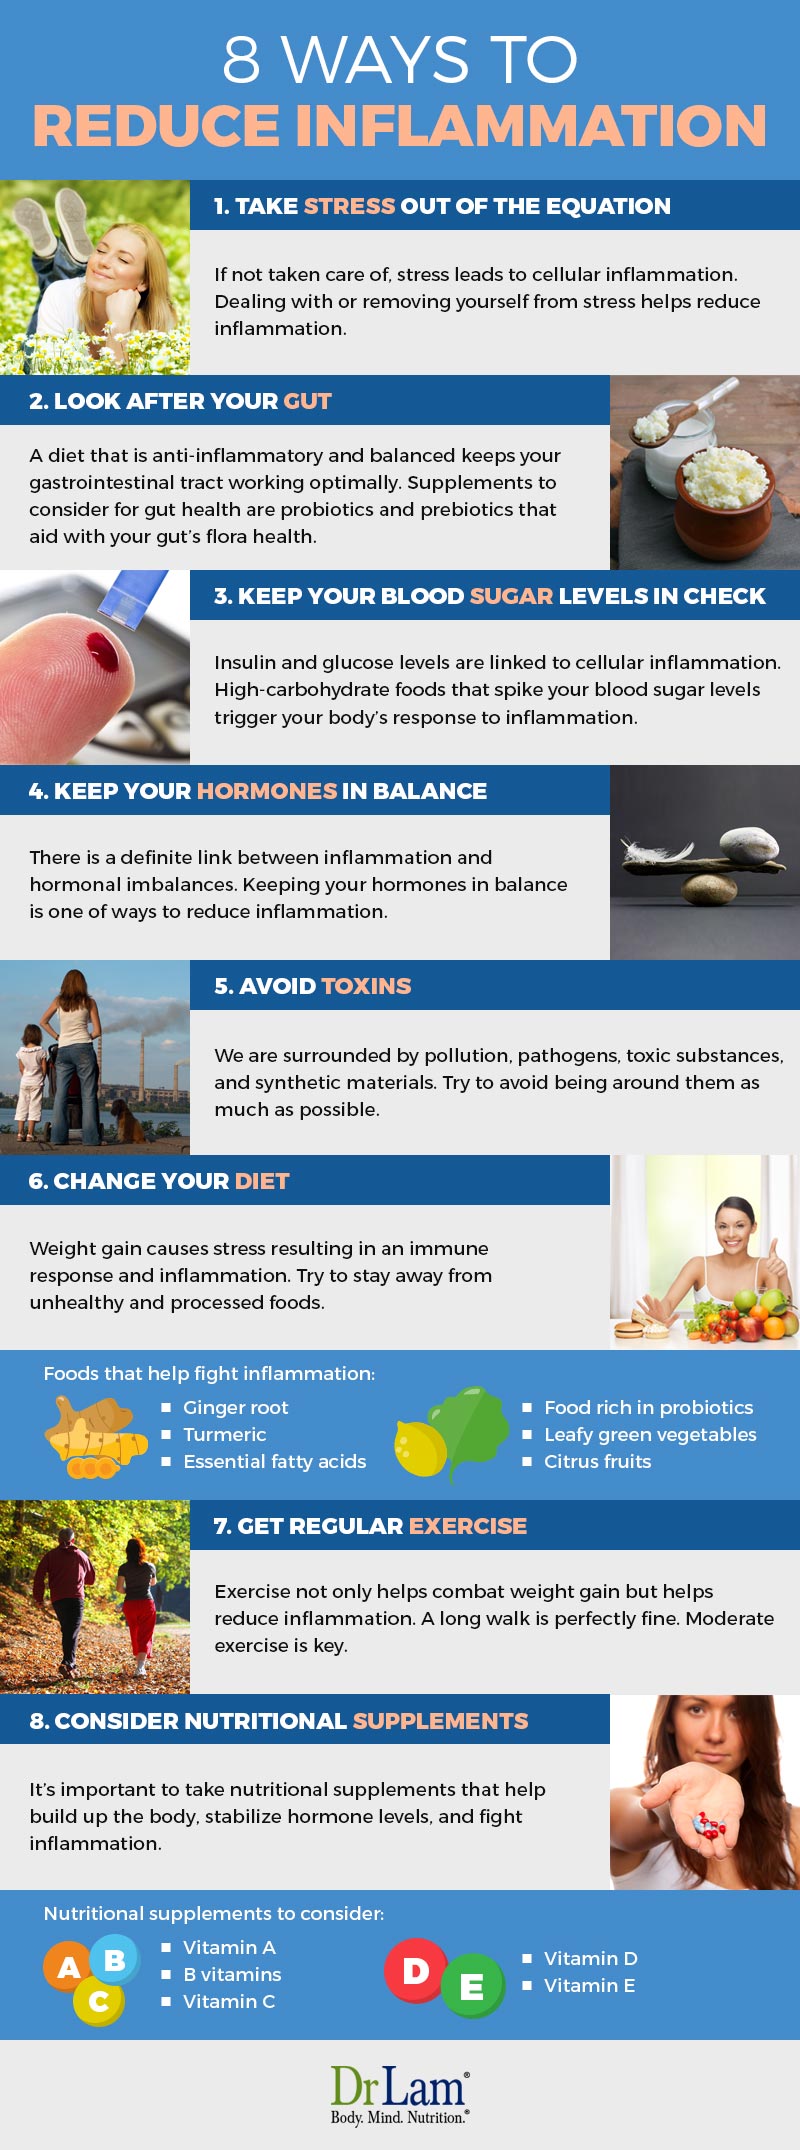 Check out this easy to understand infographic about the 8 ways to reduce inflammation